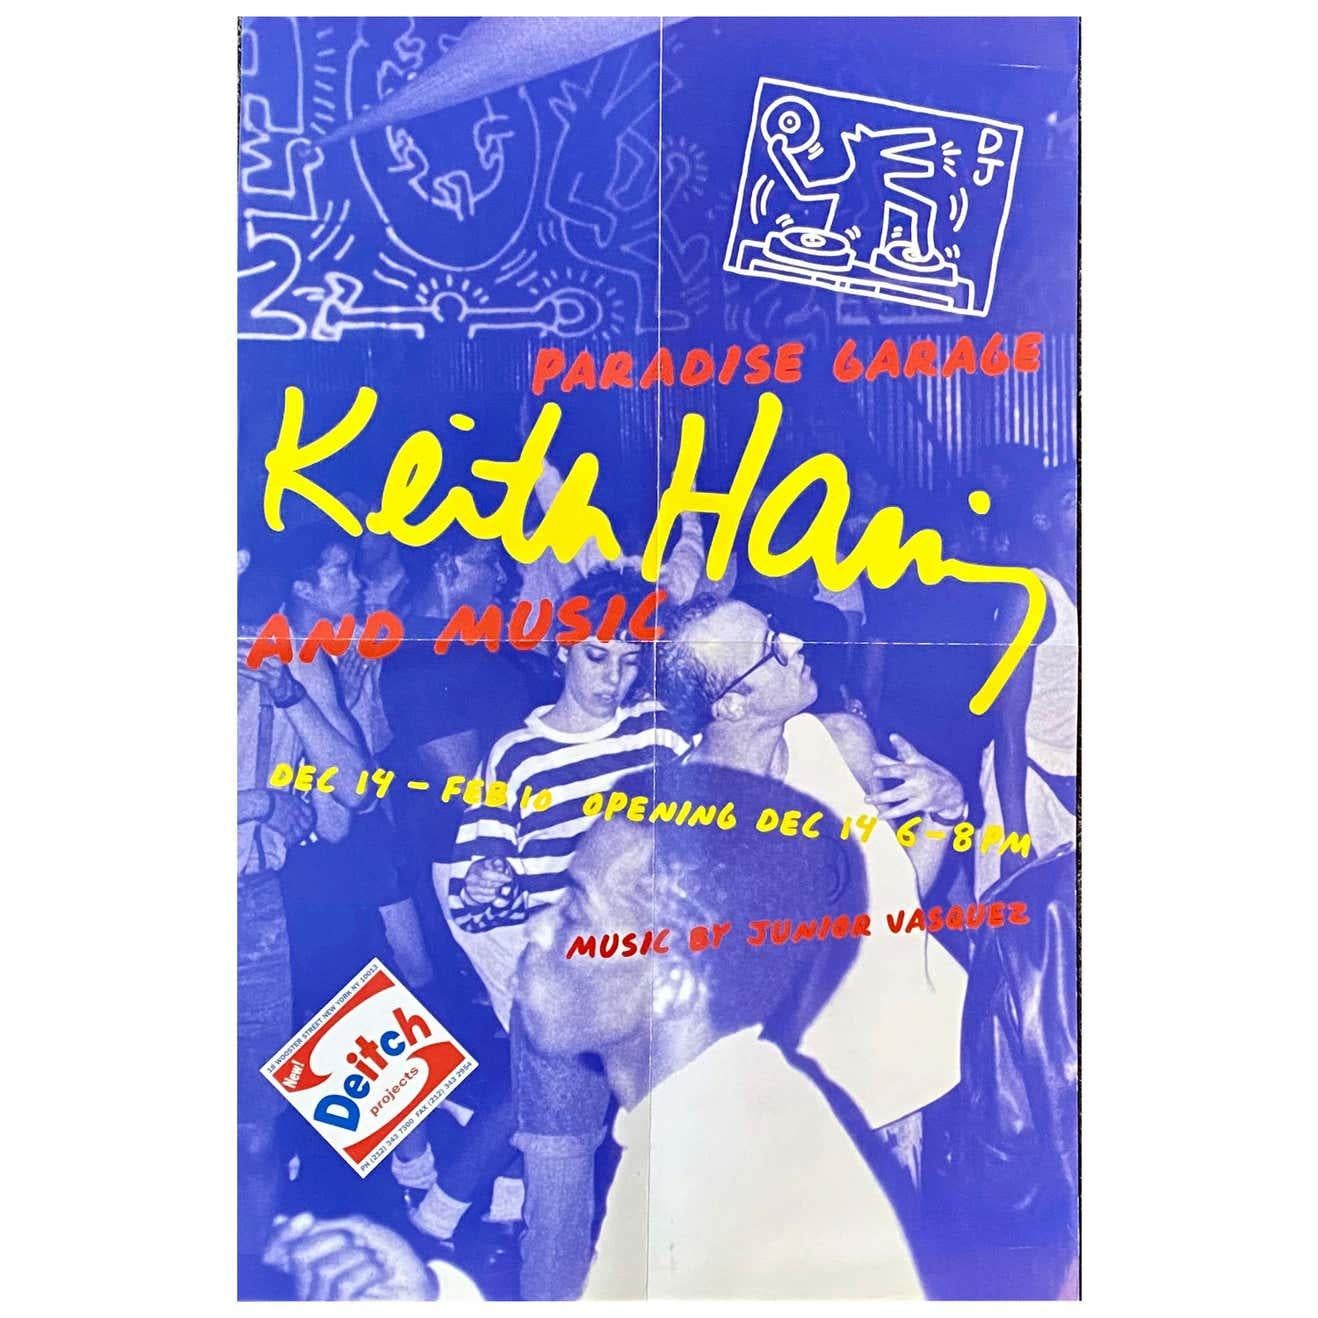 Rare vintage Keith Haring exhibition poster published on the occasion of:

‘Paradise Garage: Keith Haring and Music,
December 14, 2000-February 10, 2001, Deitch Projects, 18 Wooster Street, New York, NY.’

Offset lithograph; measures: 11 x 17